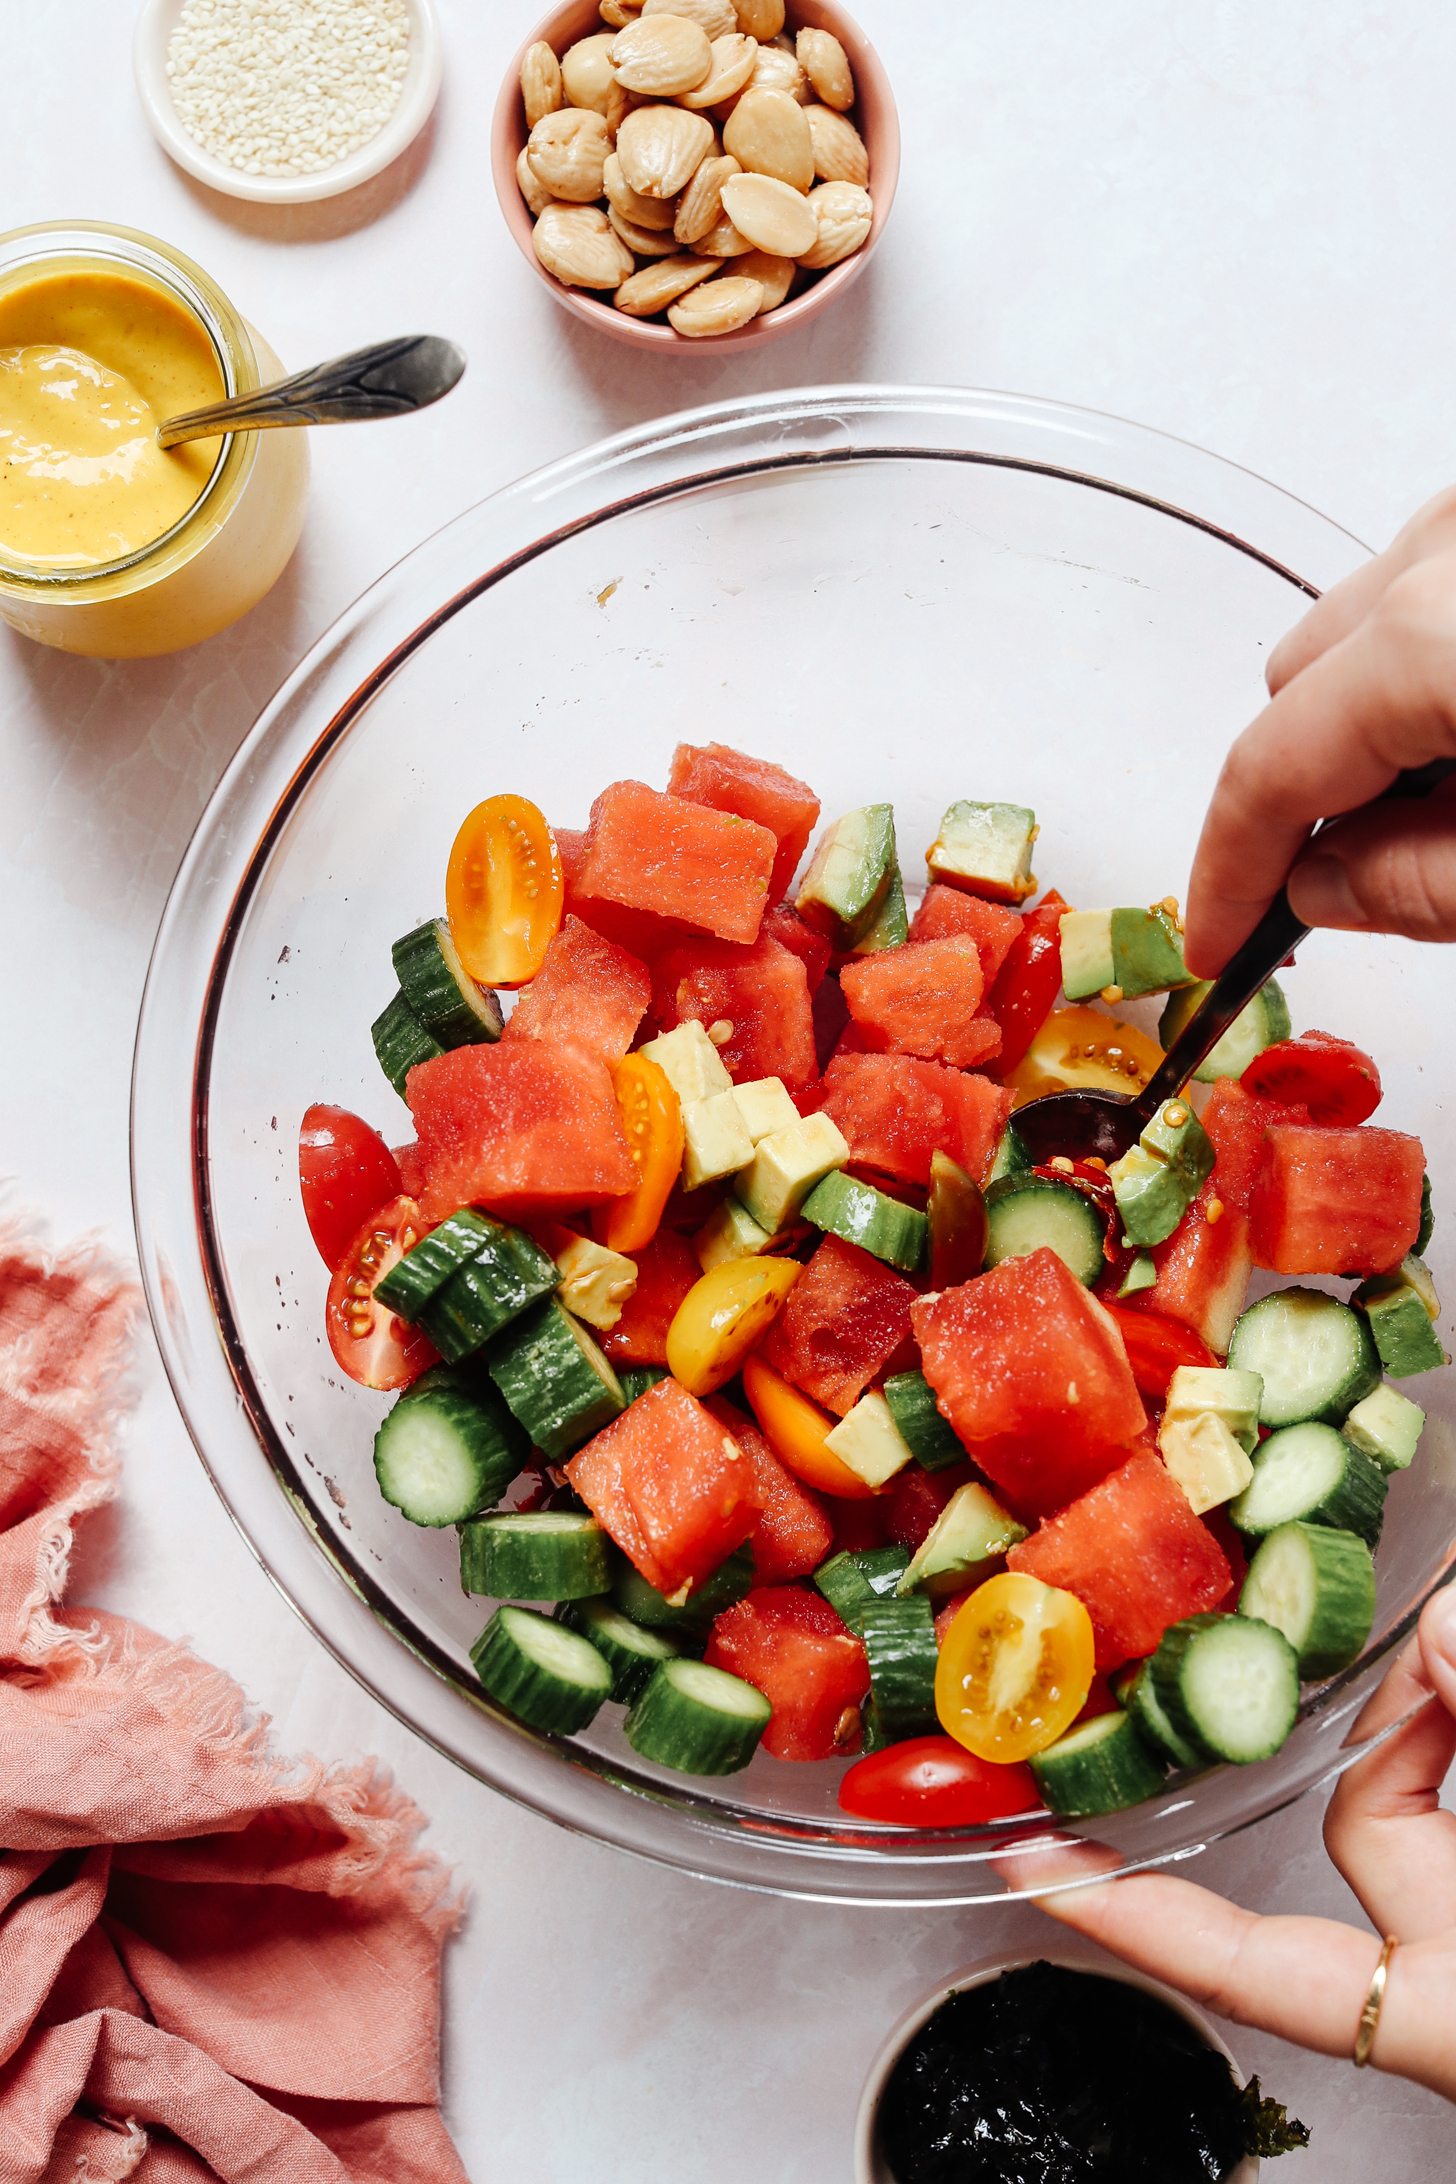 Stirring together cubed watermelon, mango, avocado, and tomato in a mixing bowl